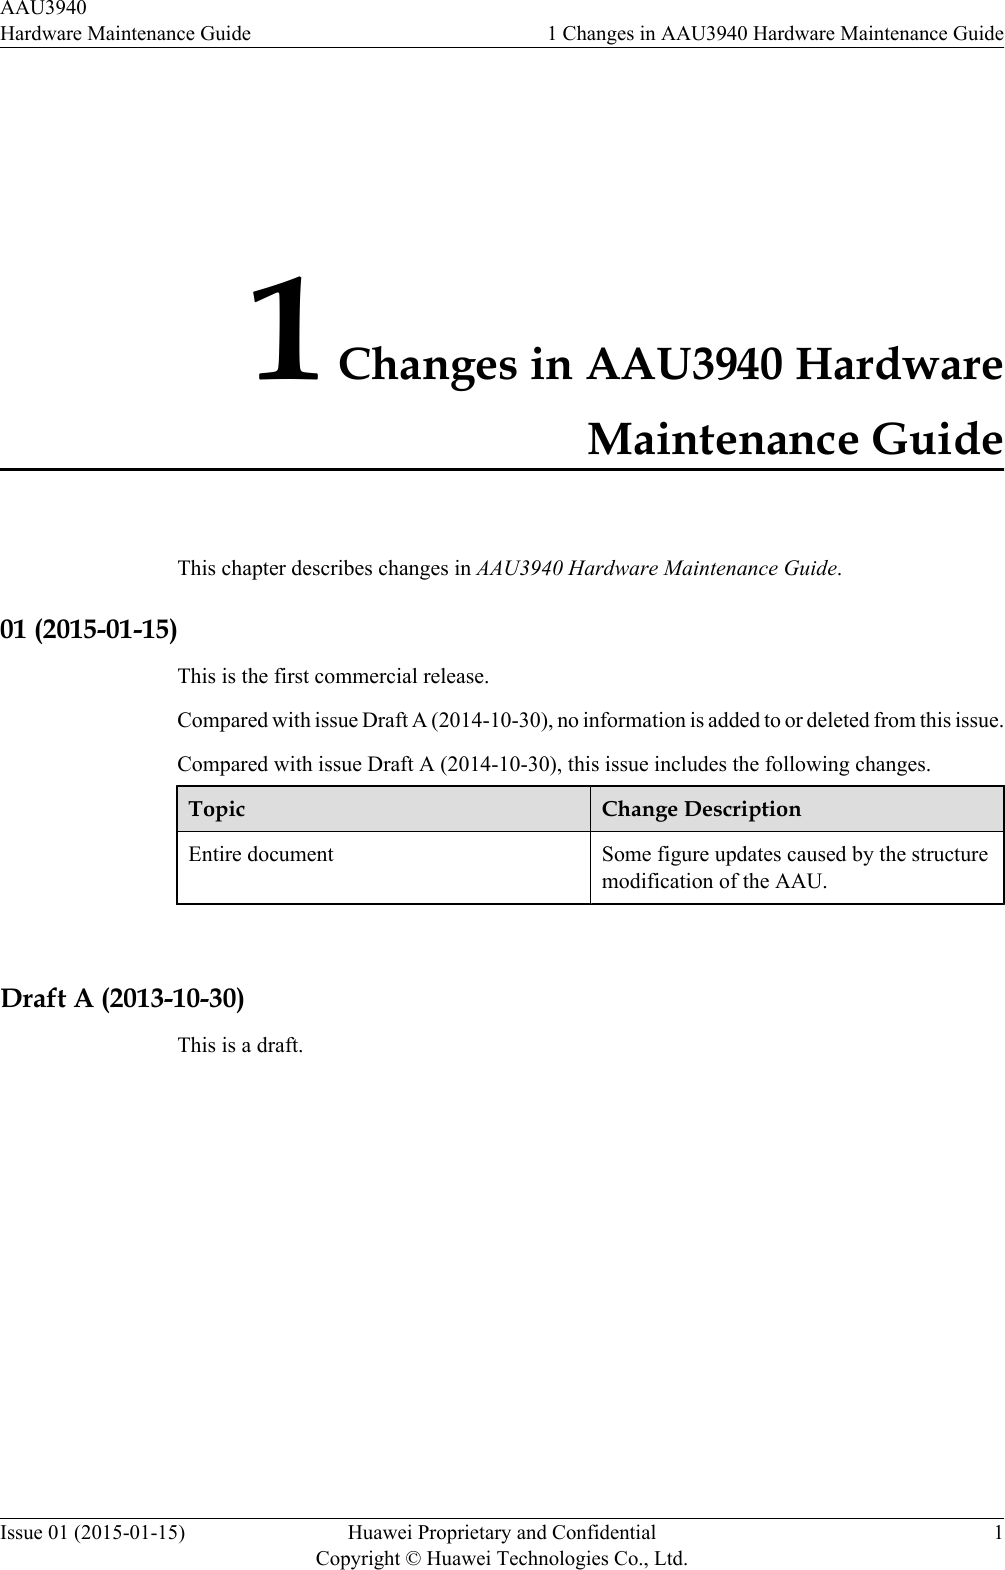 1 Changes in AAU3940 HardwareMaintenance GuideThis chapter describes changes in AAU3940 Hardware Maintenance Guide.01 (2015-01-15)This is the first commercial release.Compared with issue Draft A (2014-10-30), no information is added to or deleted from this issue.Compared with issue Draft A (2014-10-30), this issue includes the following changes.Topic Change DescriptionEntire document Some figure updates caused by the structuremodification of the AAU. Draft A (2013-10-30)This is a draft.AAU3940Hardware Maintenance Guide 1 Changes in AAU3940 Hardware Maintenance GuideIssue 01 (2015-01-15) Huawei Proprietary and ConfidentialCopyright © Huawei Technologies Co., Ltd.1